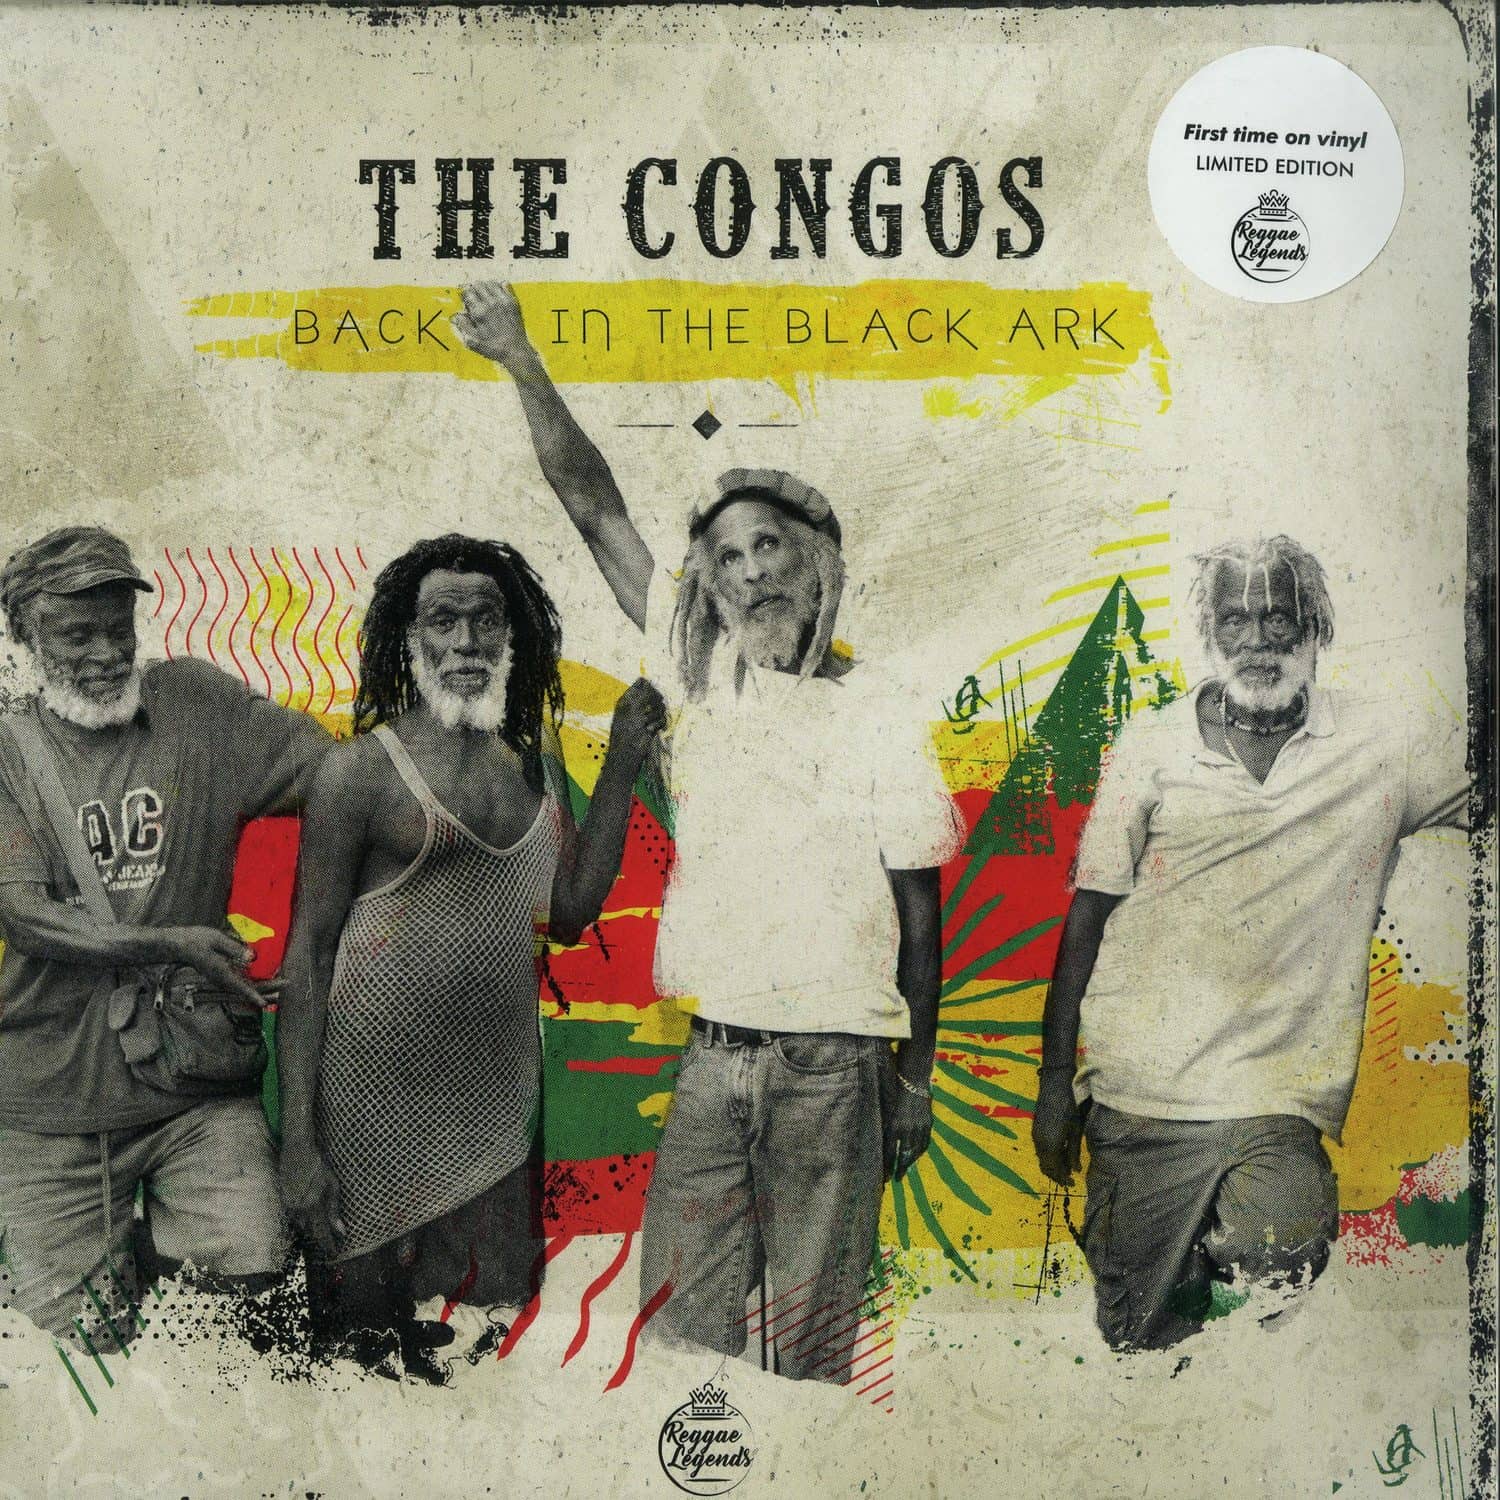 The Congos - BACK IN THE BLACK ARK 